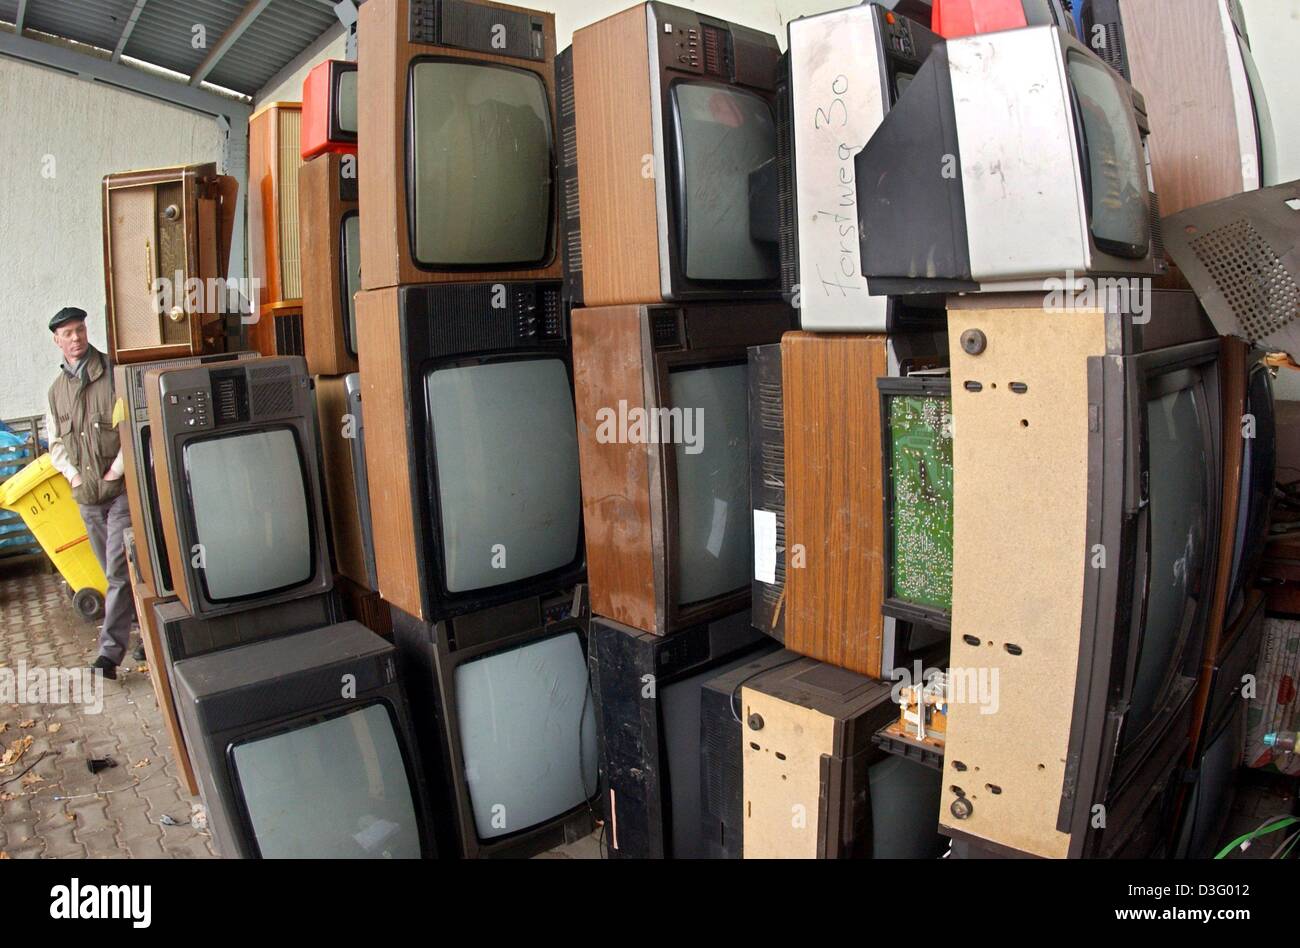 (dpa) - Old TV sets are stored at the recycling company ERV in Gera, Germany, 30 January 2003. The tellies and other electric devices are disassembled and some parts recycled. Last year the company handled 580 tons of electric scrap from households in Gera and the region. So far, electric scrap was collected free of cost twice a year. In Eastern Thuringia this will be reduced to on Stock Photo